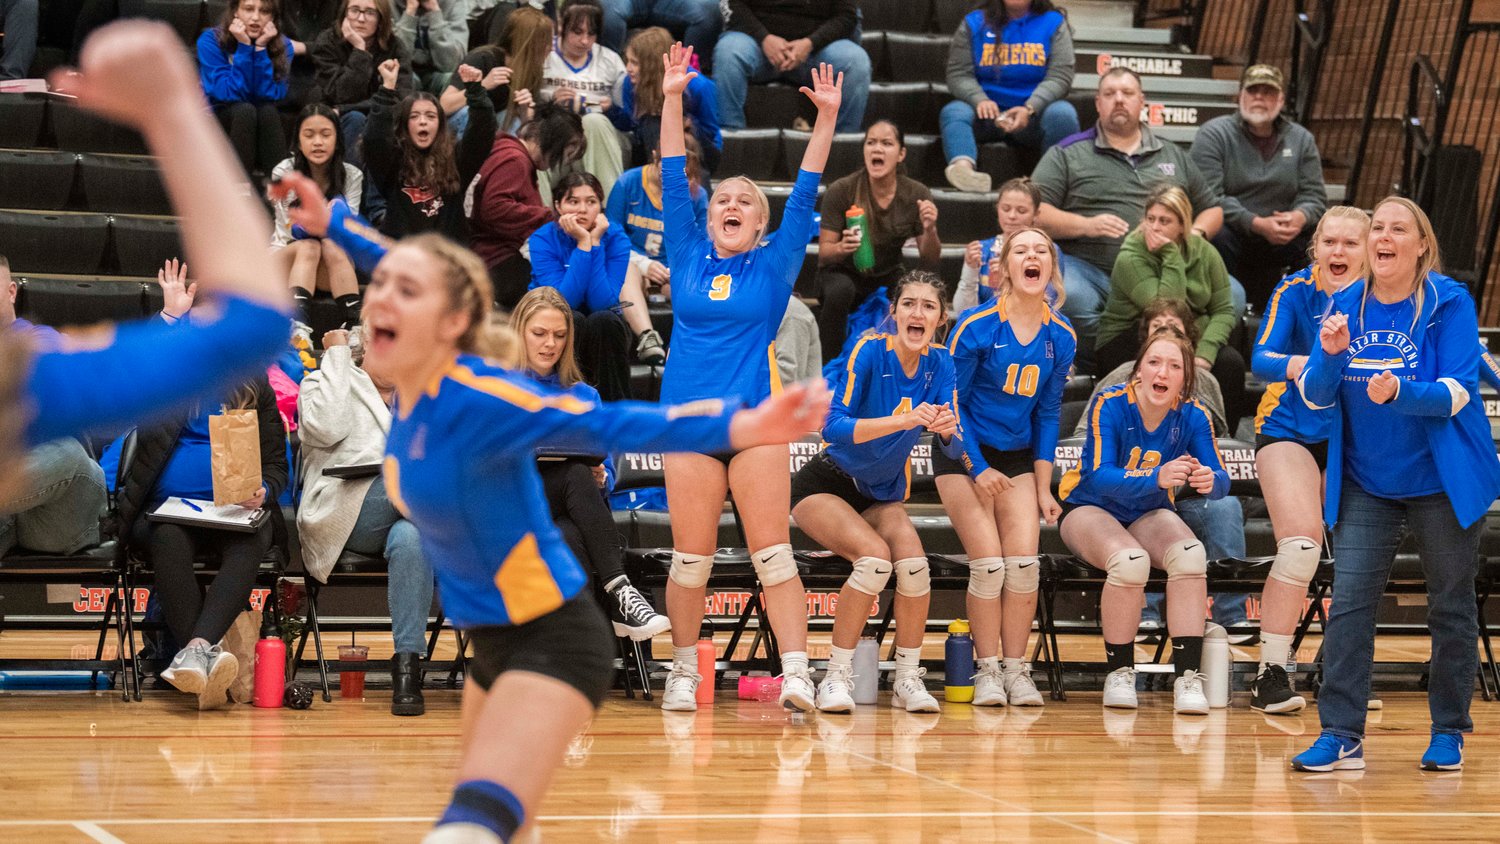 Warriors celebrate a point during a volleyball match against the Tigers Thursday night in Centralia.